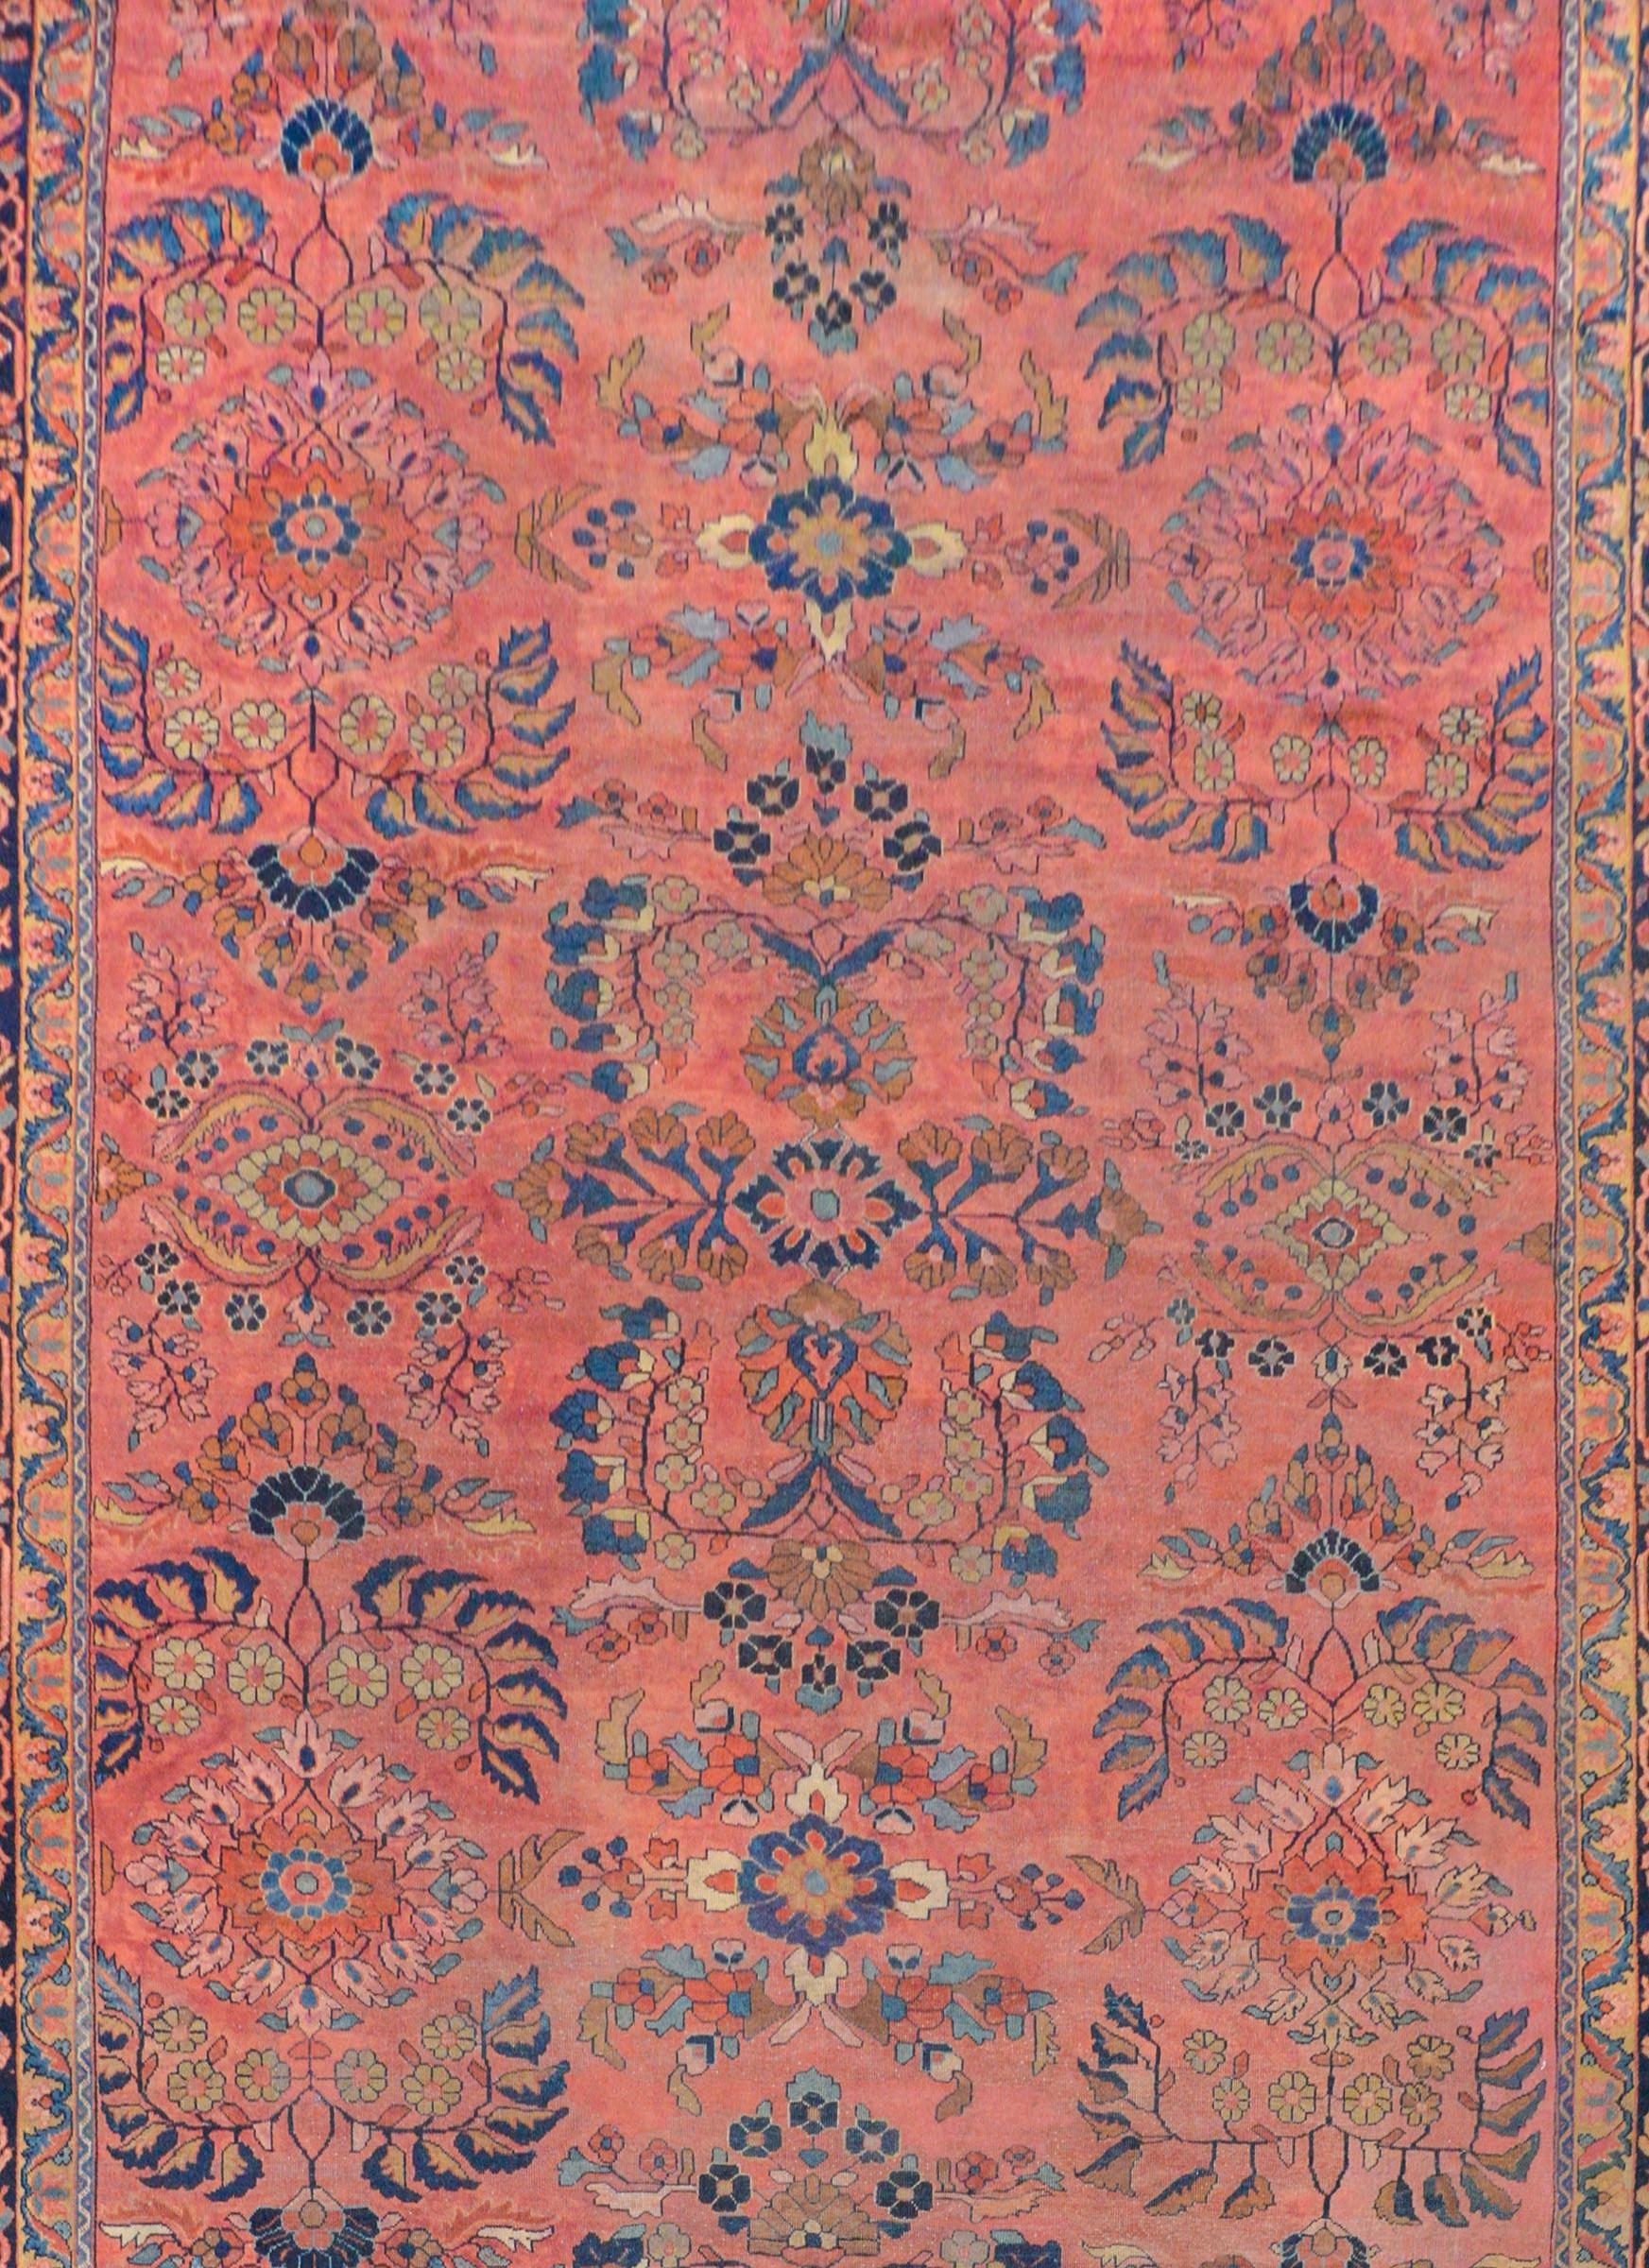 An outstanding early 20th century Persian Sarouk Mahal rug woven with a fantastic large-scale mirrored pattern of flowers and leaves woven in light and dark indigo, cream, crimson, and gold on a pale cranberry background surrounded by a wonderful